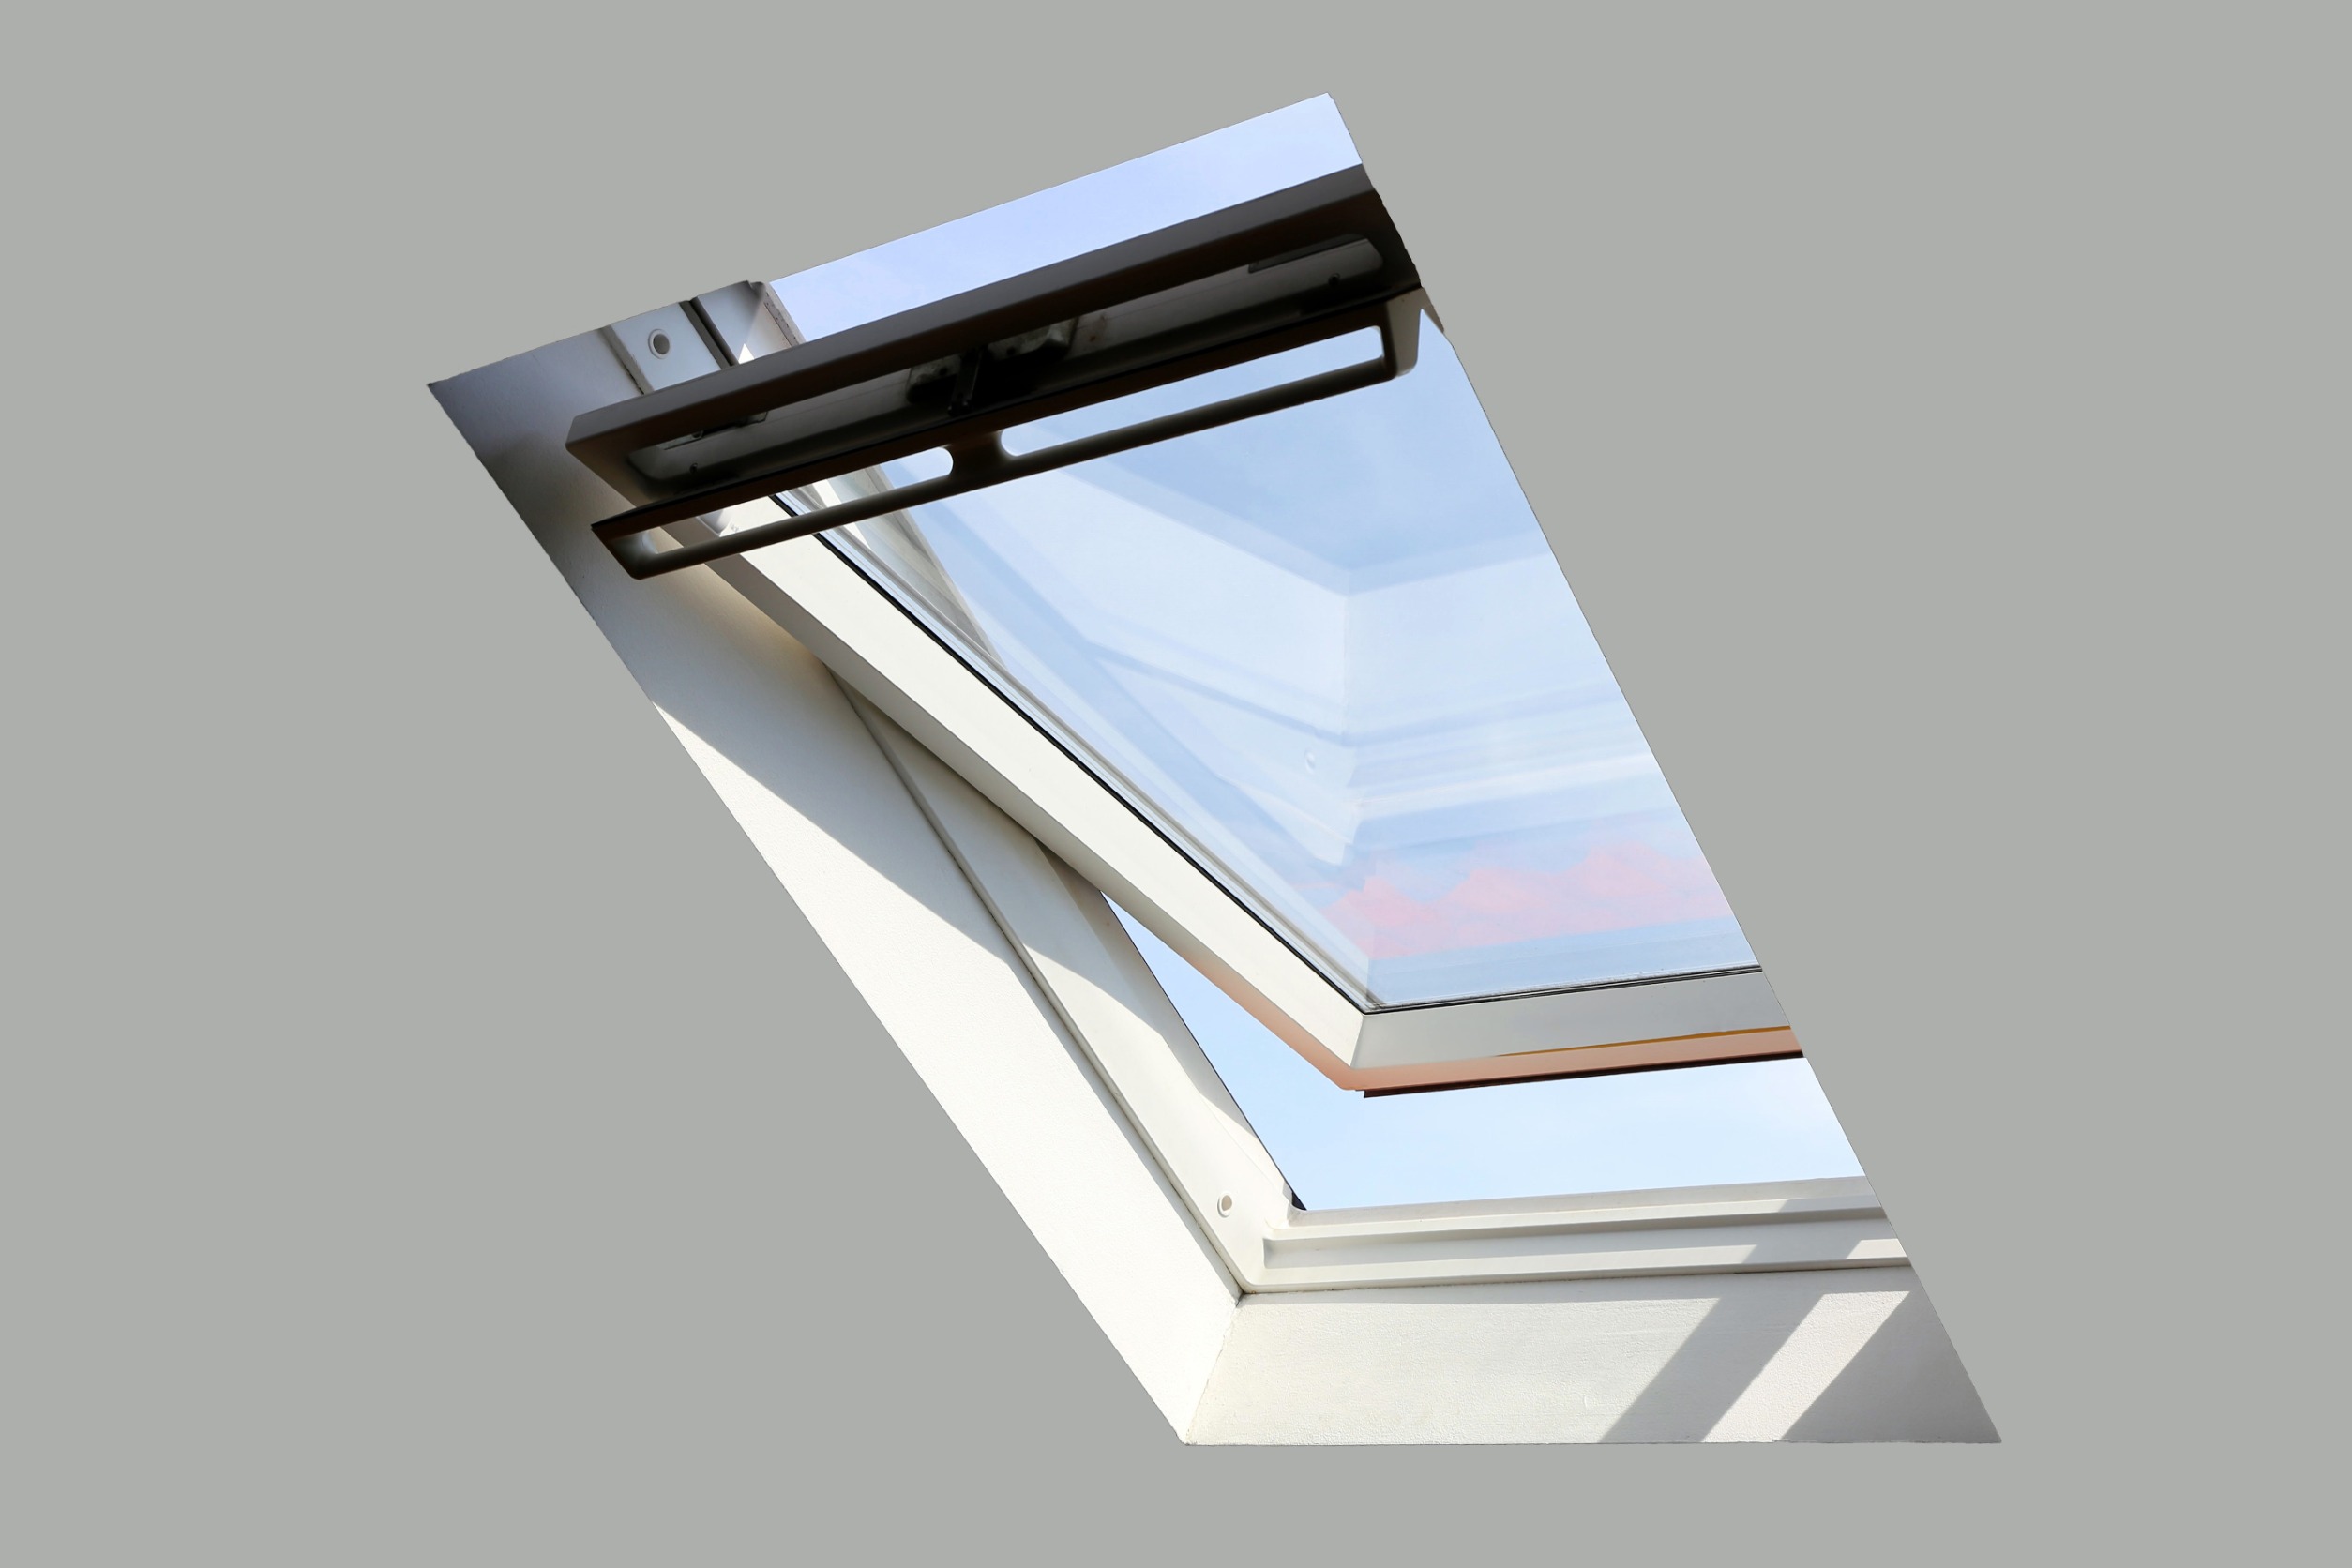 Featured Image for: Determining The Cost To Install A Skylight